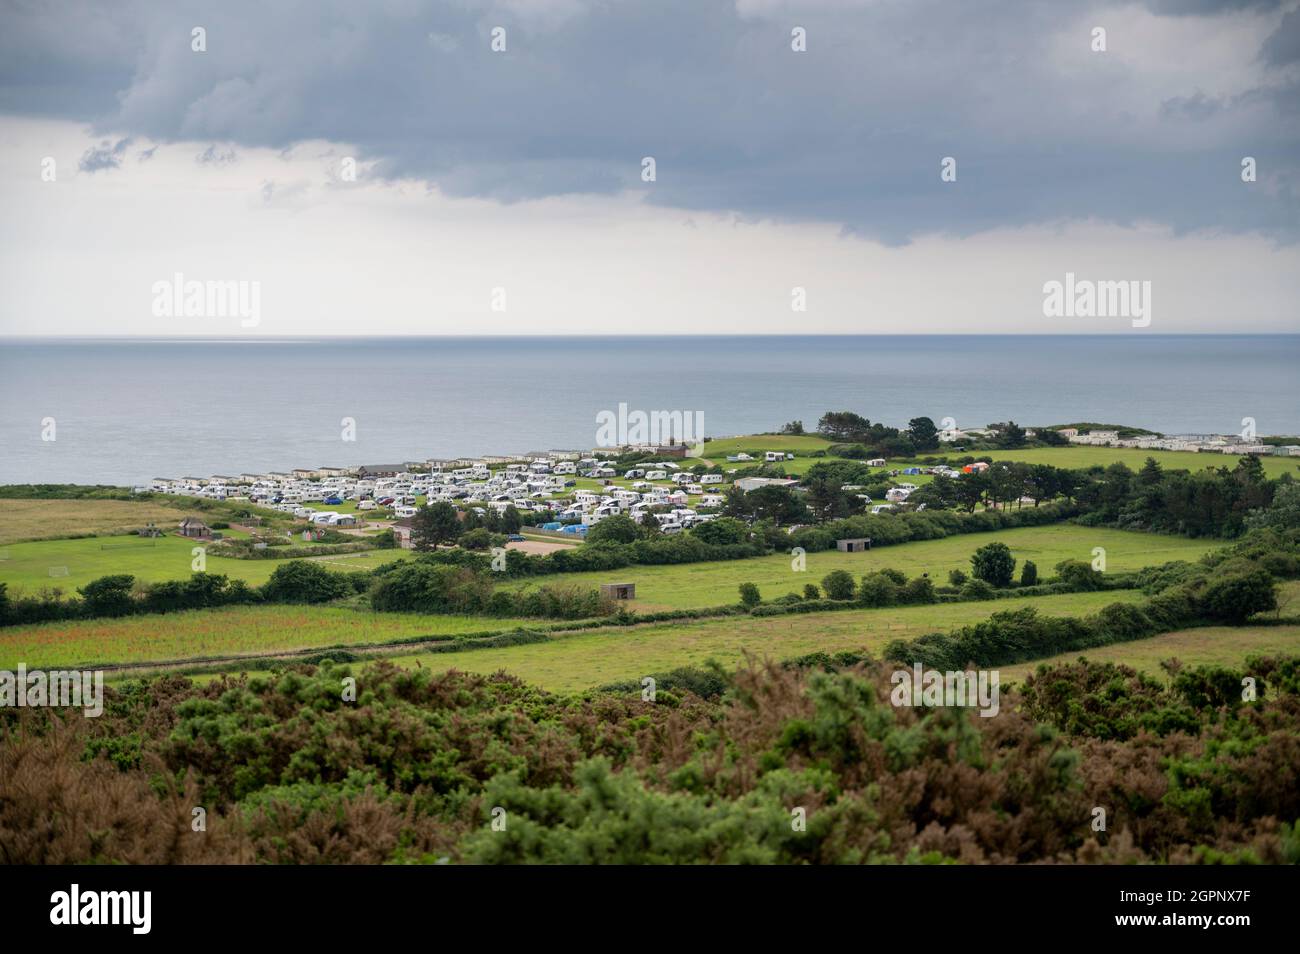 A view of a caravan site on the coast at West Runton Norfolk UK Stock Photo